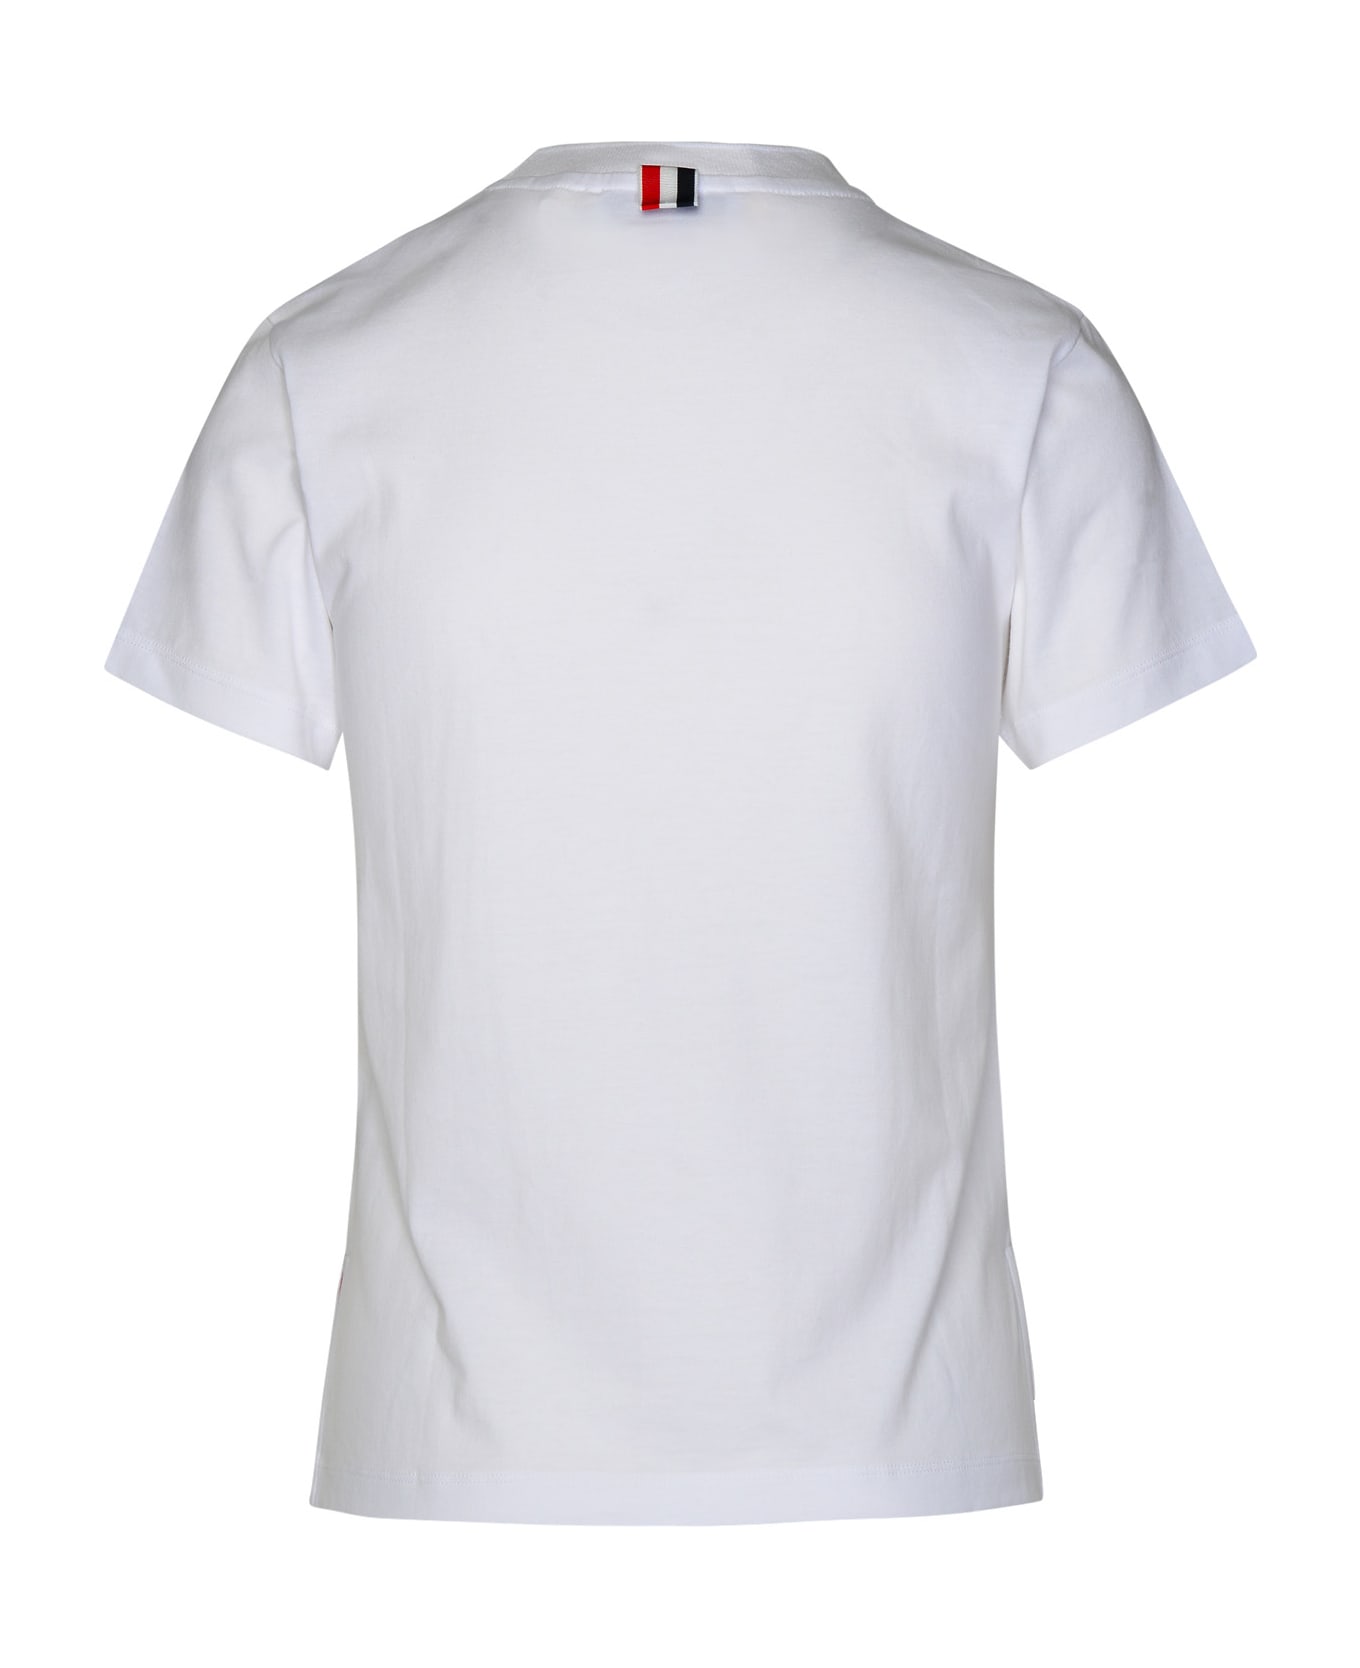 Thom Browne 'relaxed' White Cotton T-shirt - White Tシャツ